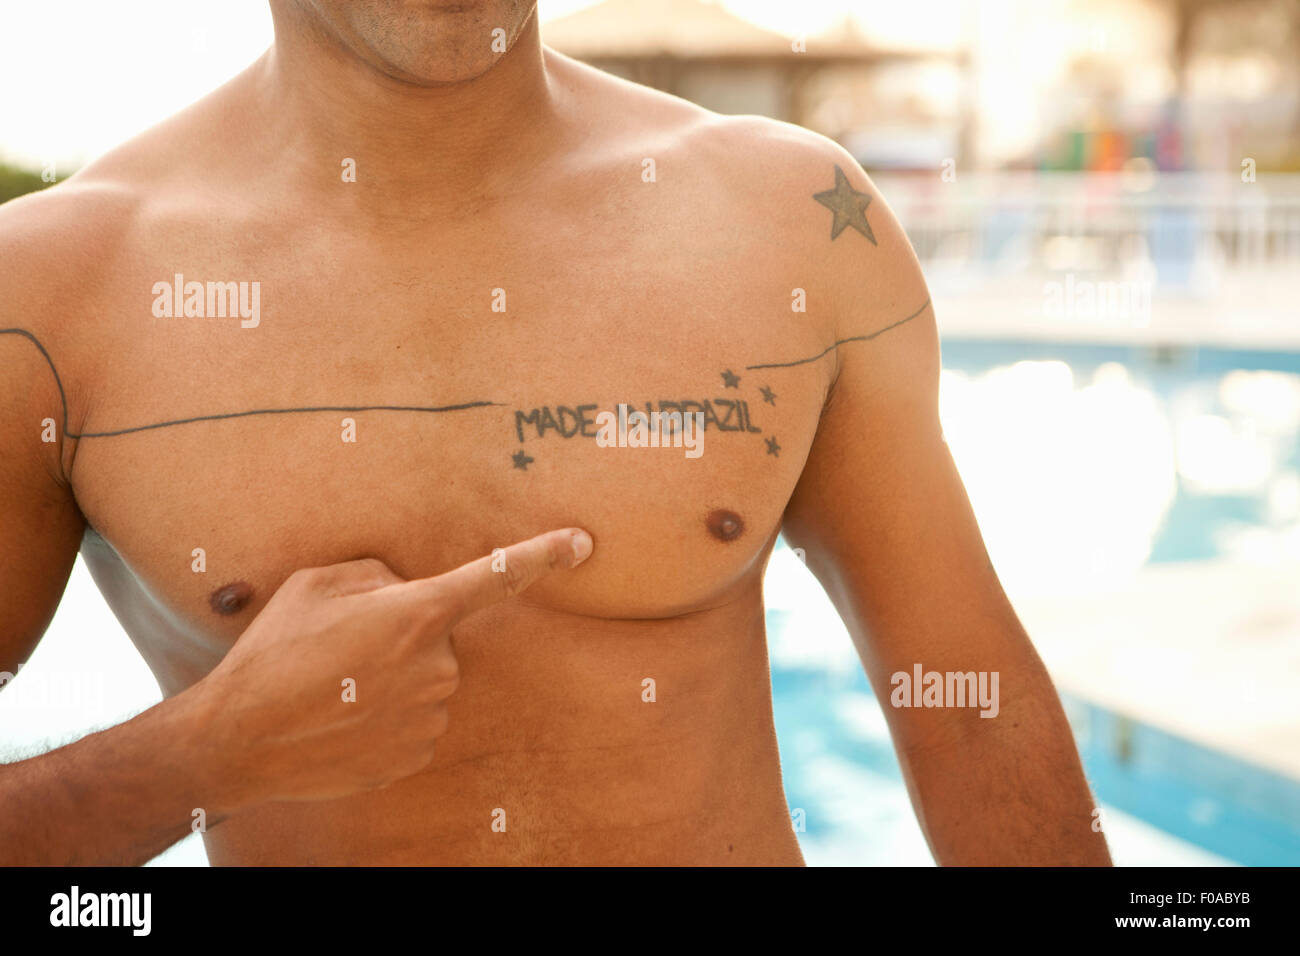 Cropped shot of man pointing to chest tattoo at hotel swimming pool, Rio De Janeiro, Brazil Stock Photo